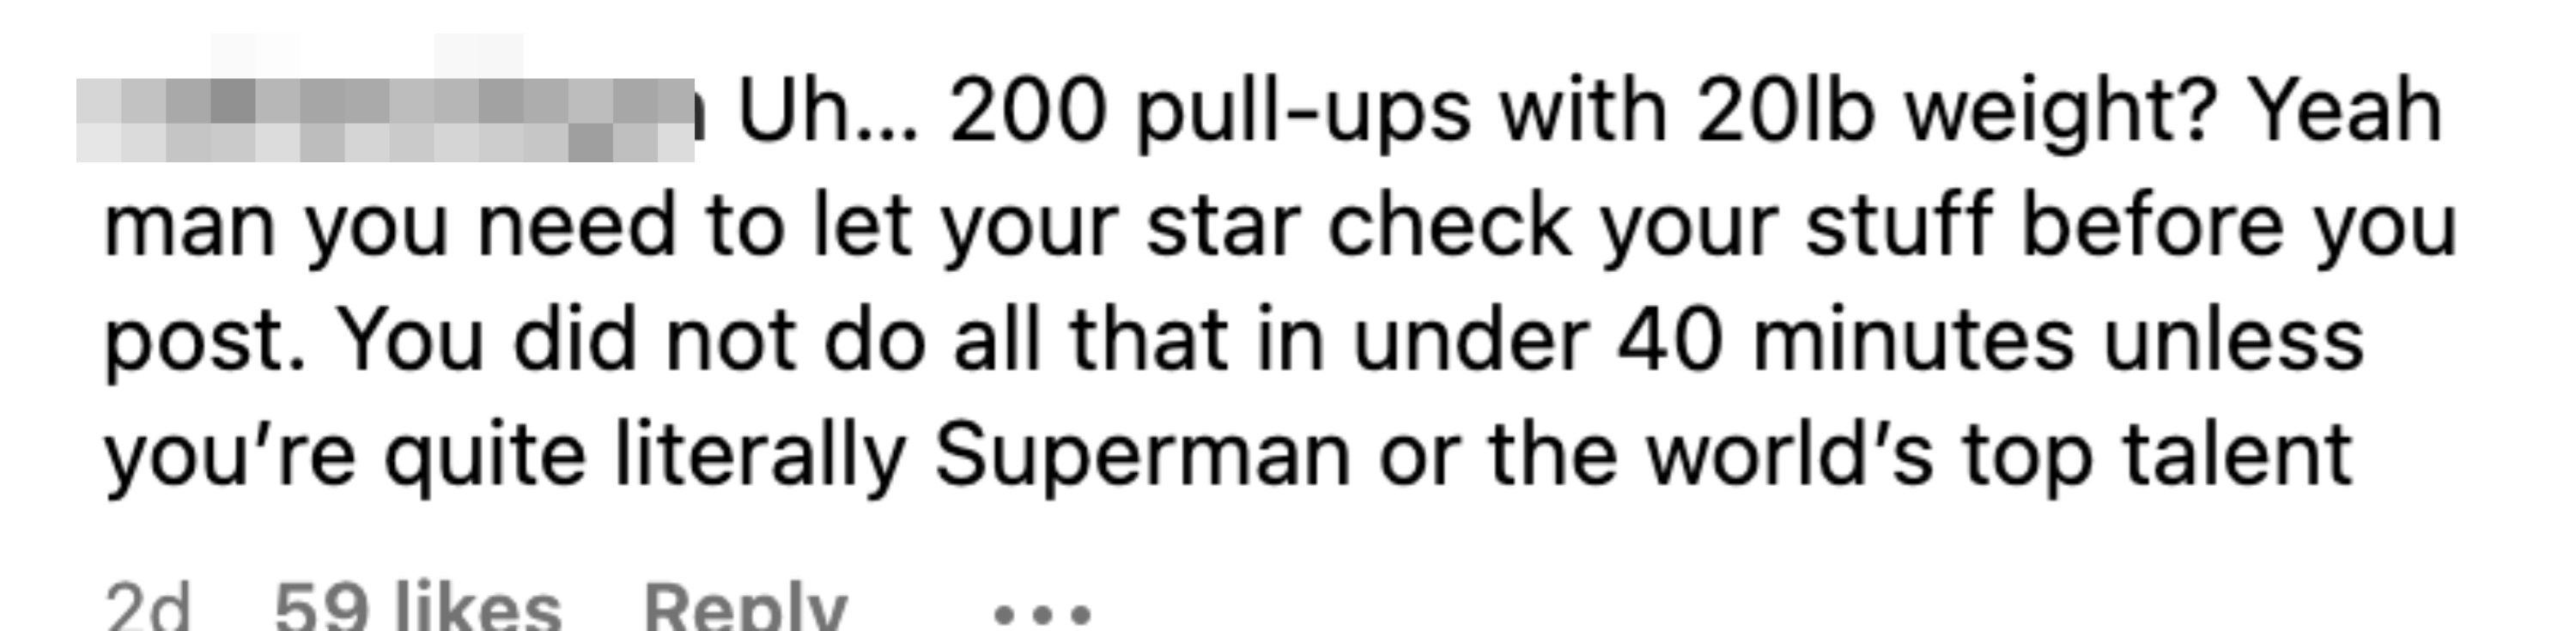 &quot;Uh, 200 pull-ups with 20lb weight? Yeah man you need to let your star check your stuff before you post; you did not do all that in under 40 minutes unless you&#x27;re quite literally Superman or the world&#x27;s top talent&quot;